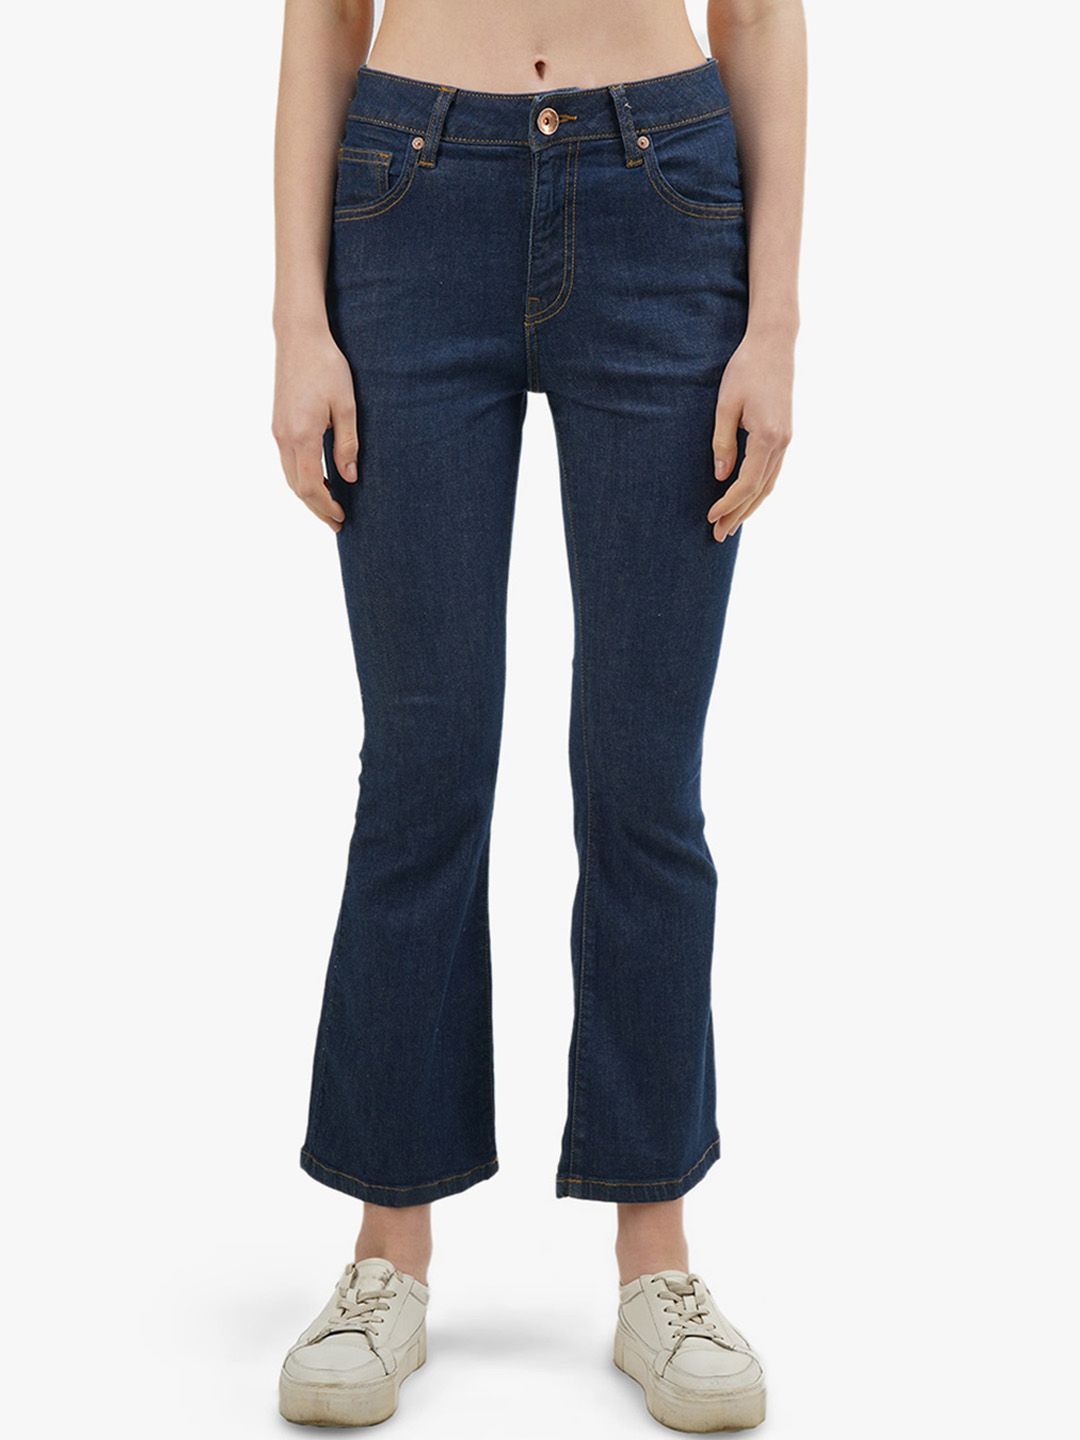 United Colors of Benetton Women Navy Blue Jeans Price in India